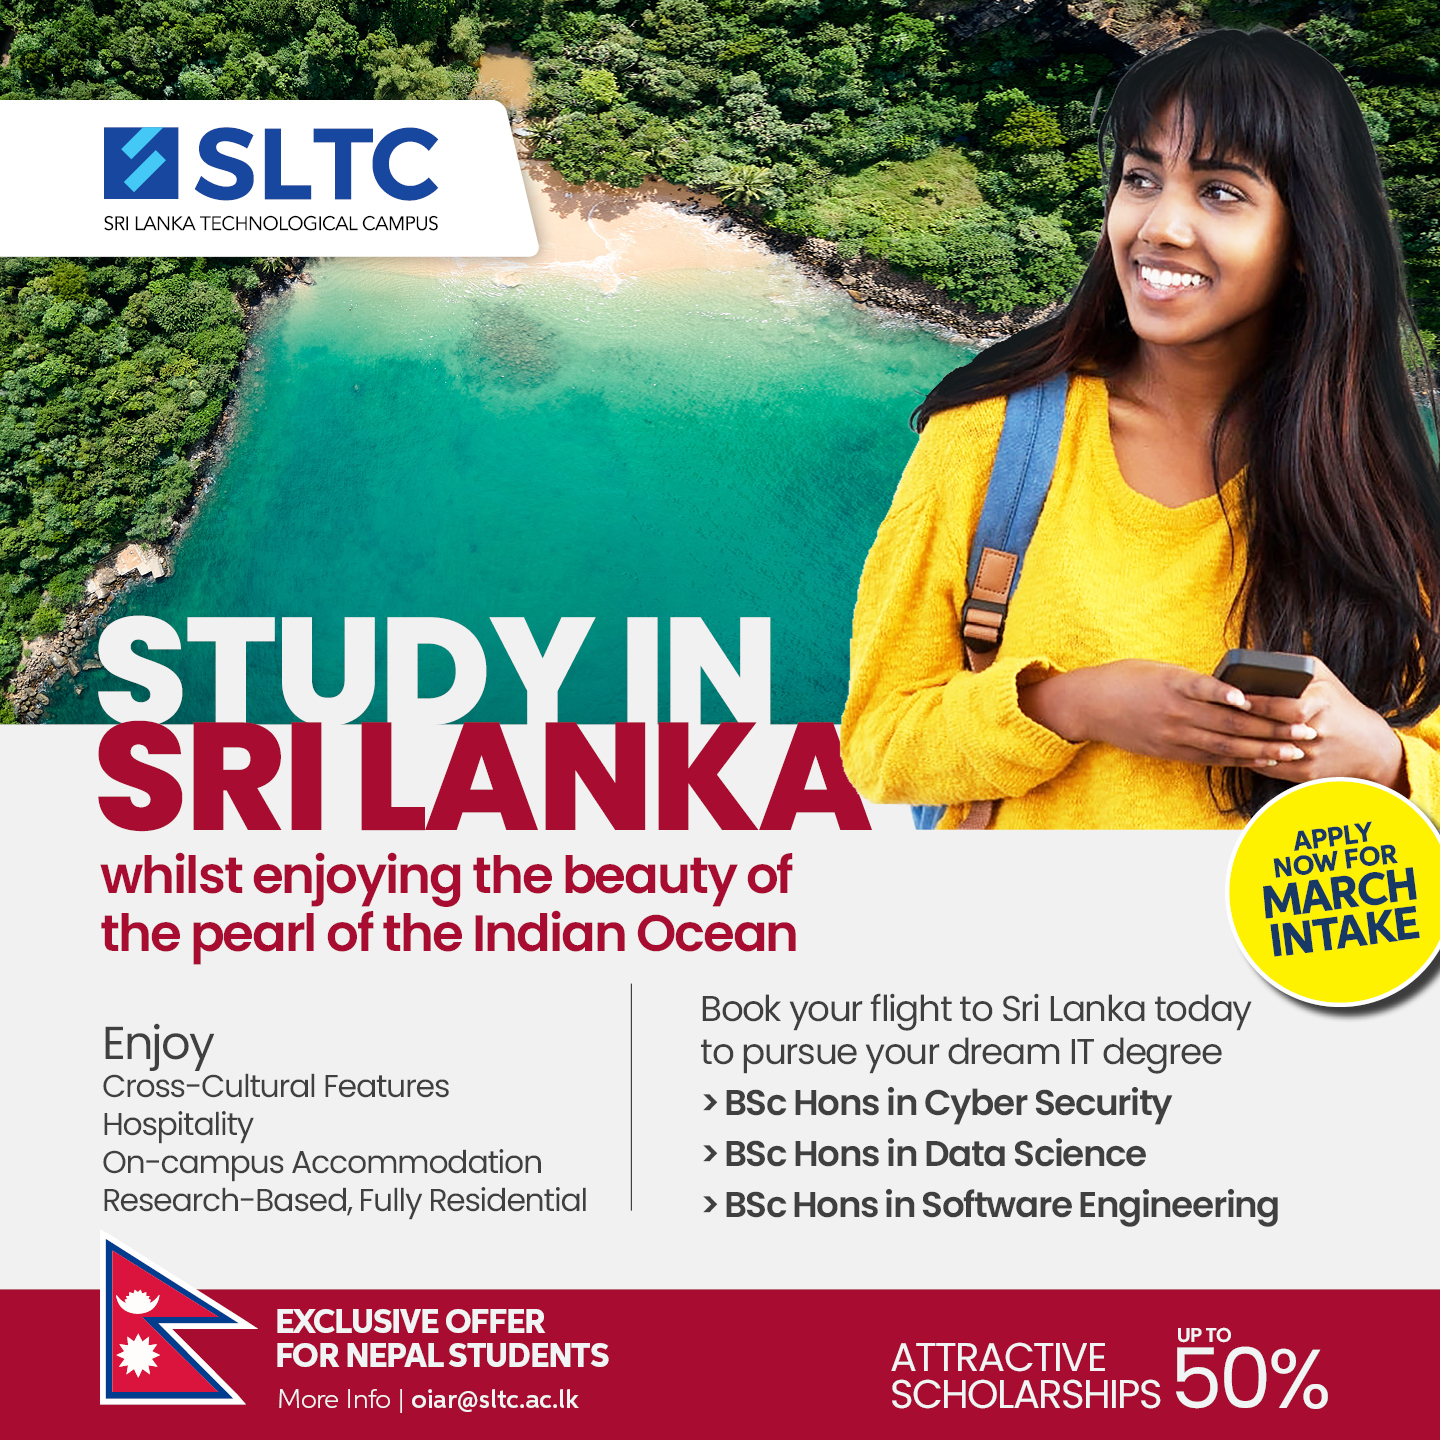 Scholarships in IT and Computing Studies (for March 2022 intake) Offered by the Sri Lanka Technological Campus (SLTC) for Nepali Students 